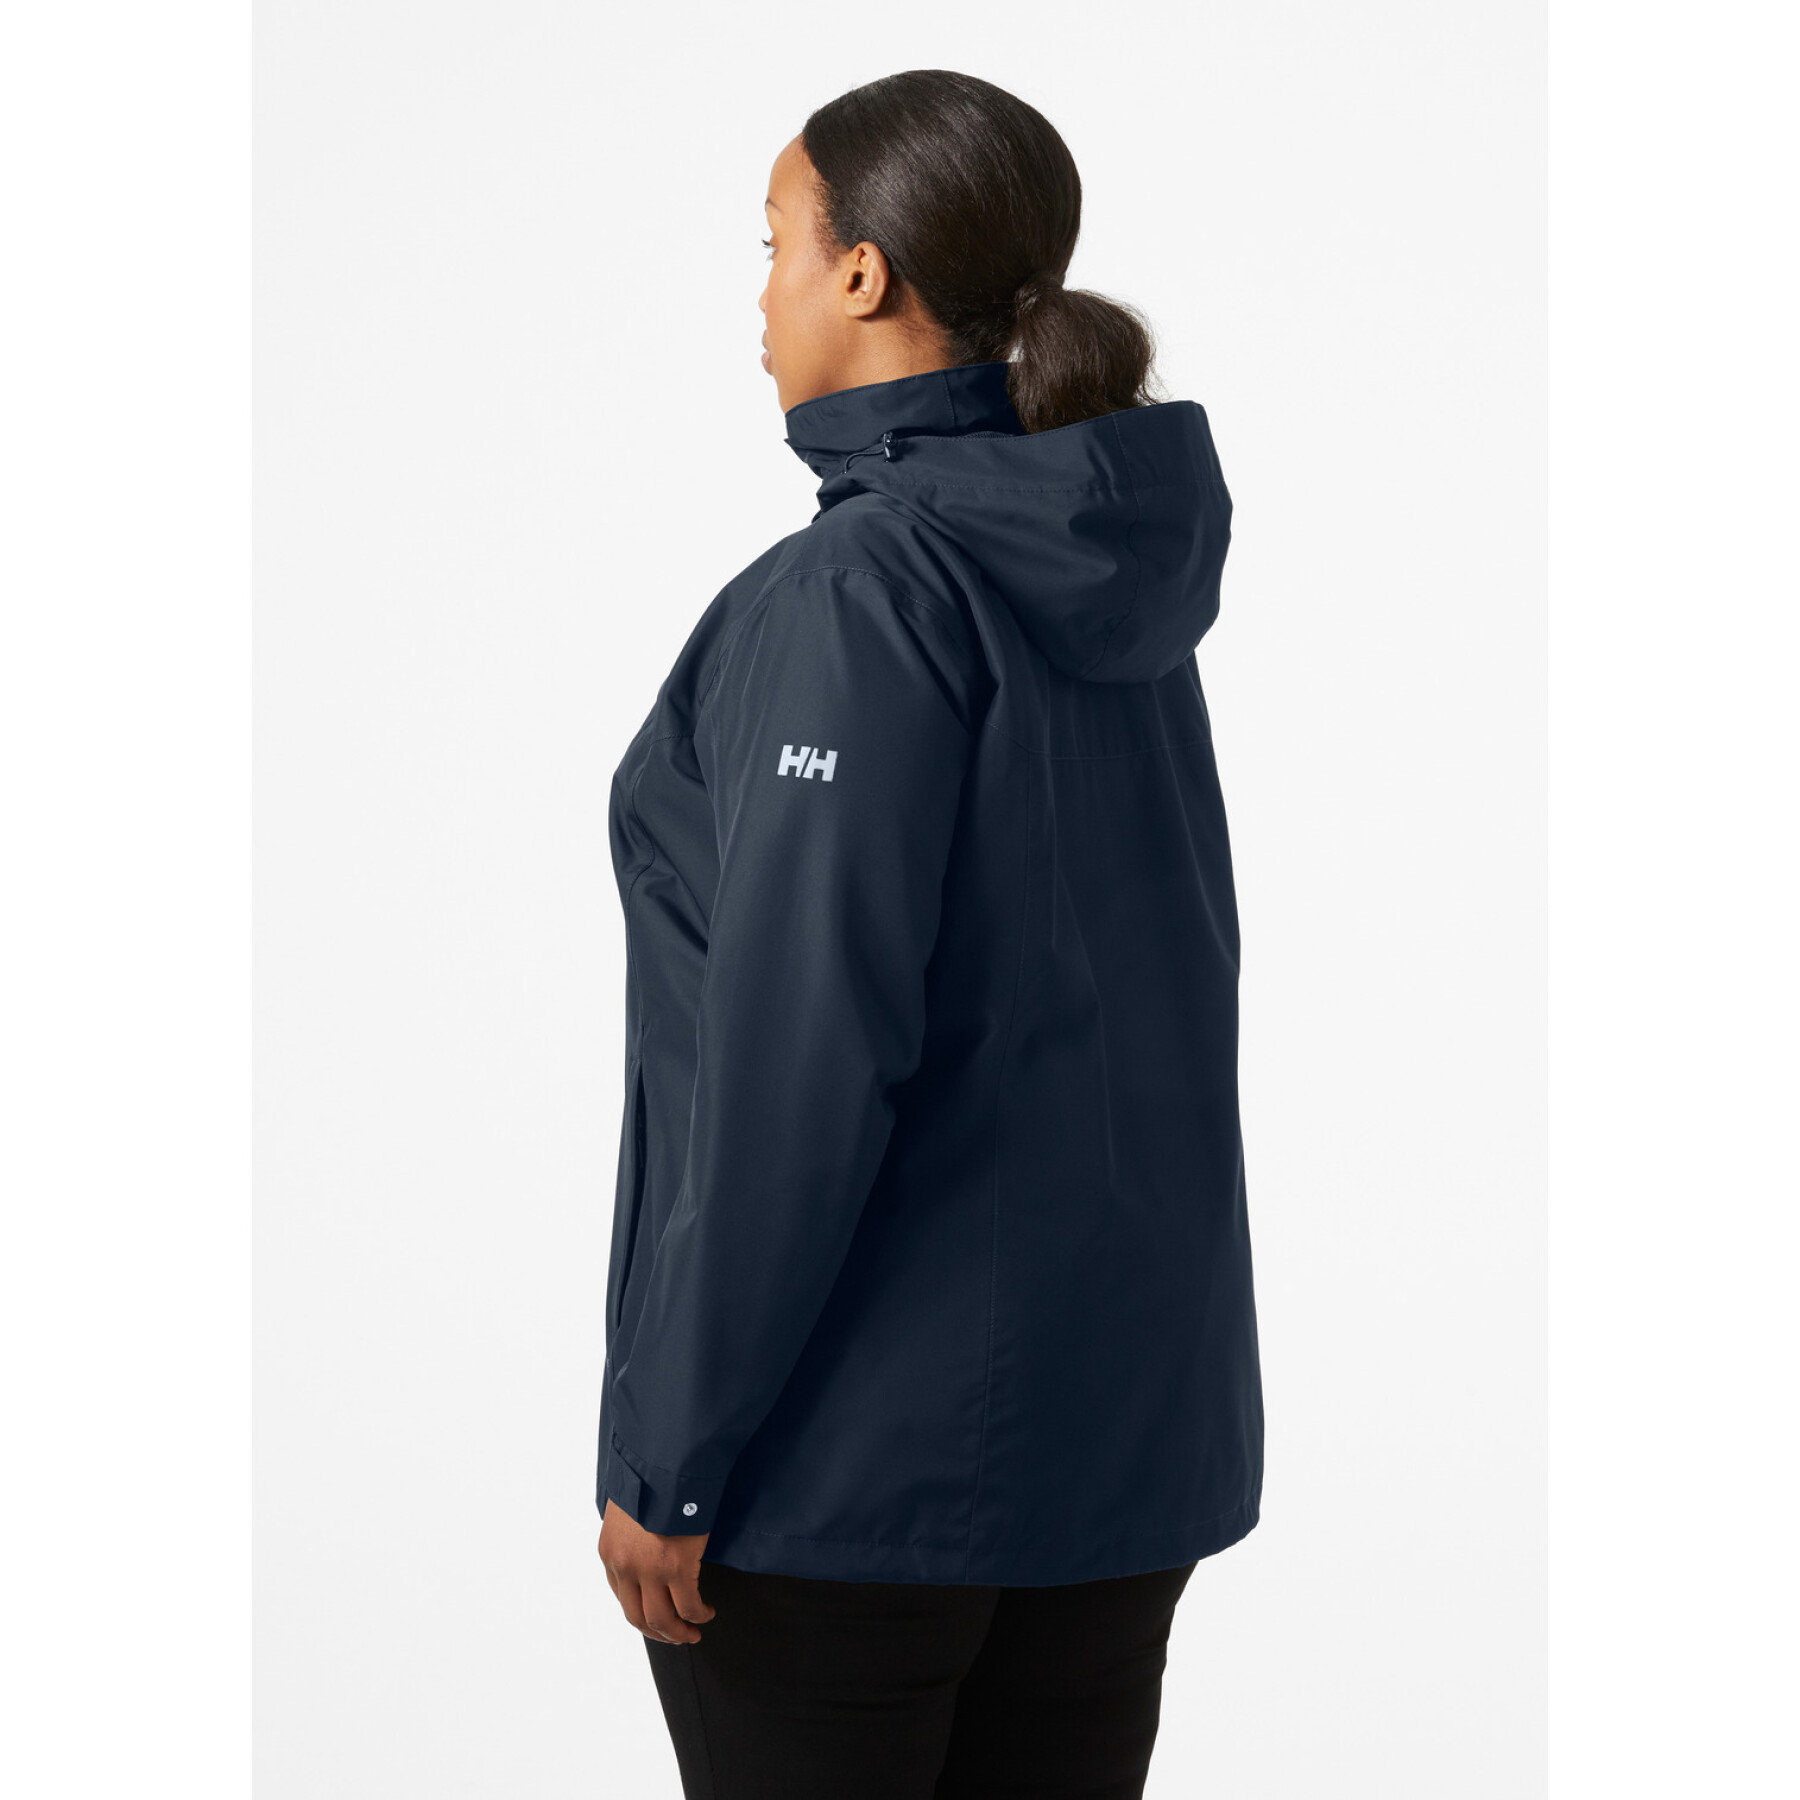 Chaqueta impermeable mujer Helly Hansen Aden plus